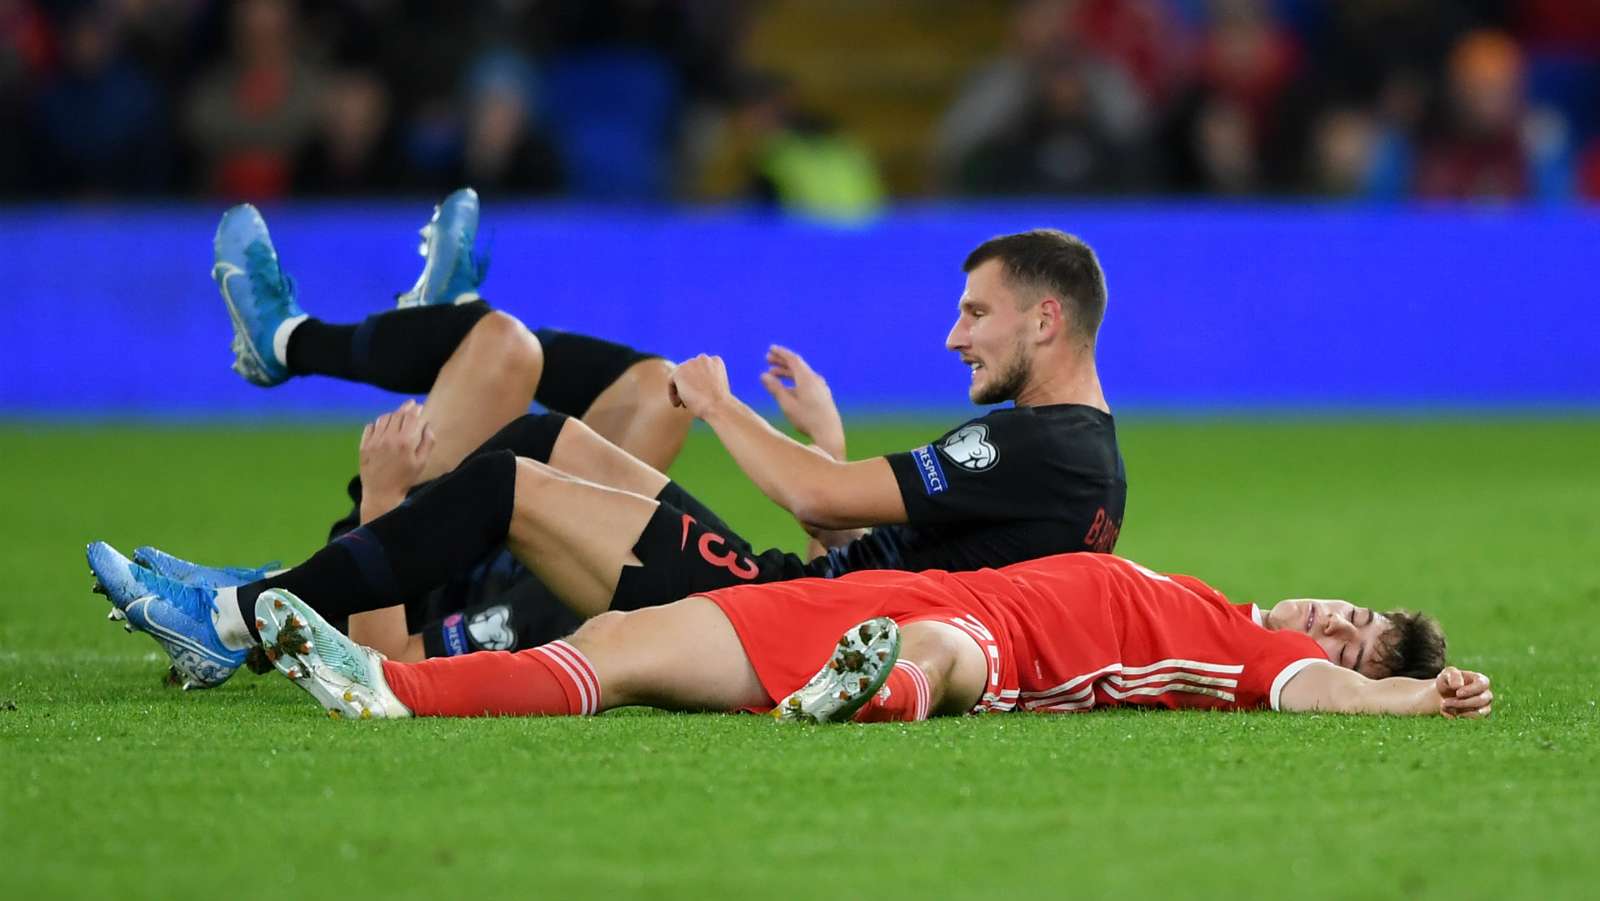 Man Utd winger Daniel James insists he was not knocked out during heavy collision in Wales draw - Bóng Đá